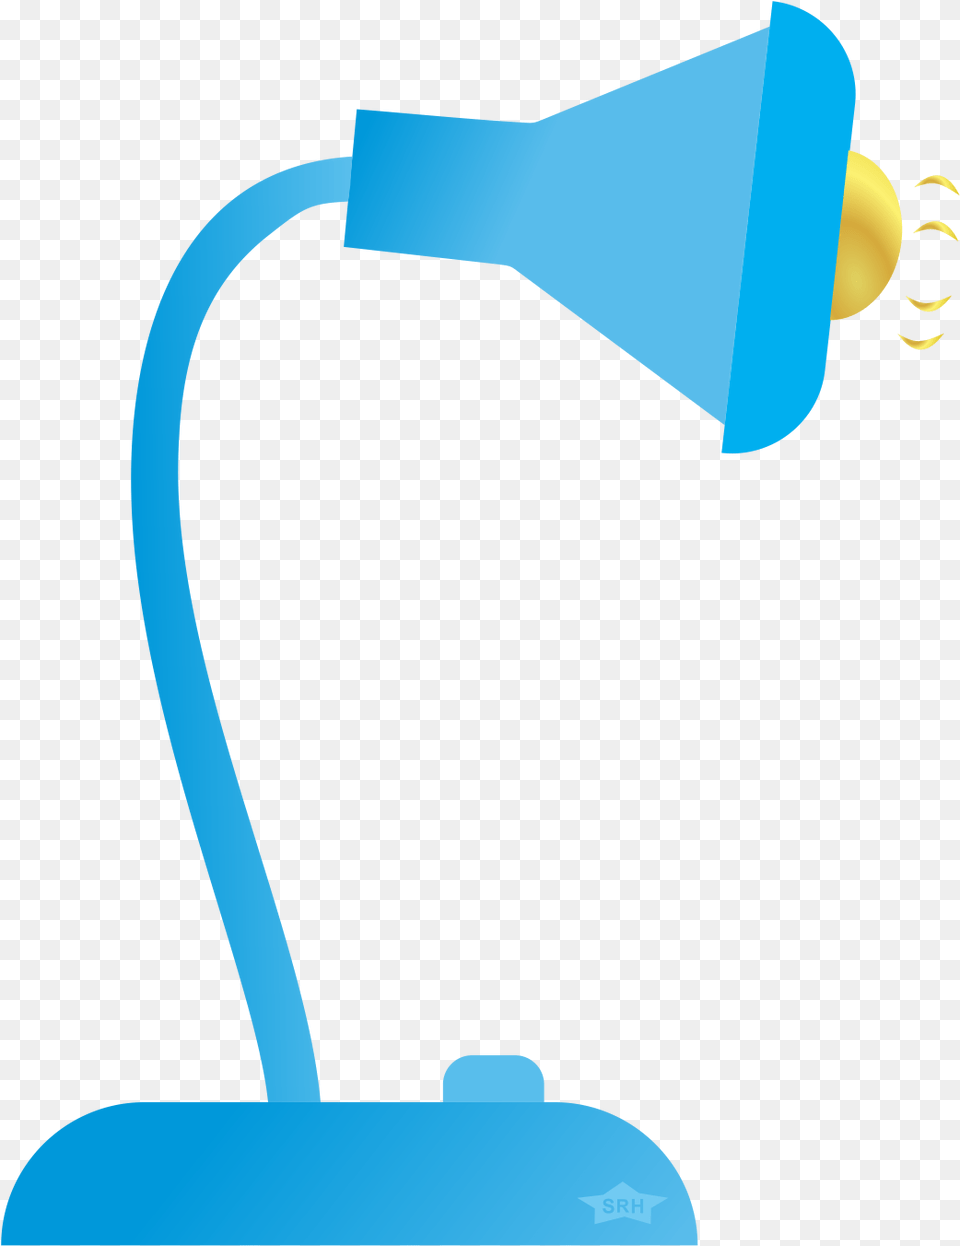 Object U0026 Household Items Light Table Lamp Night Bulb Household Supply, Lighting, Table Lamp, Lampshade Free Png Download